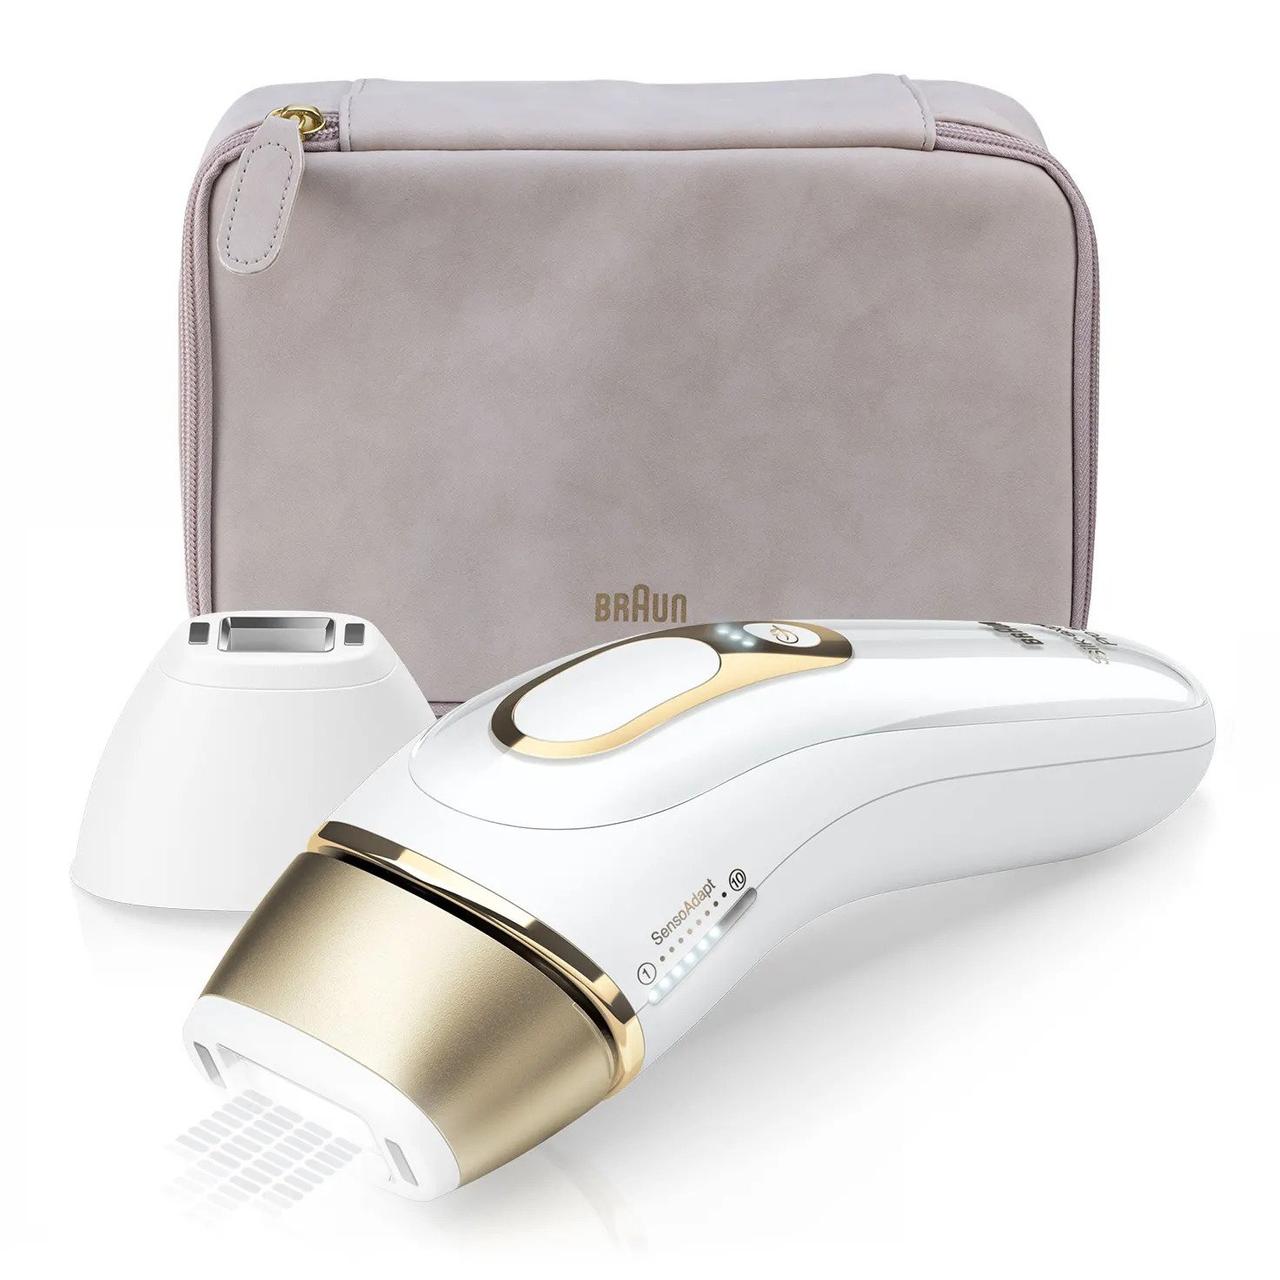 Laser hair removal at home Braun silk expert pro in white and gold